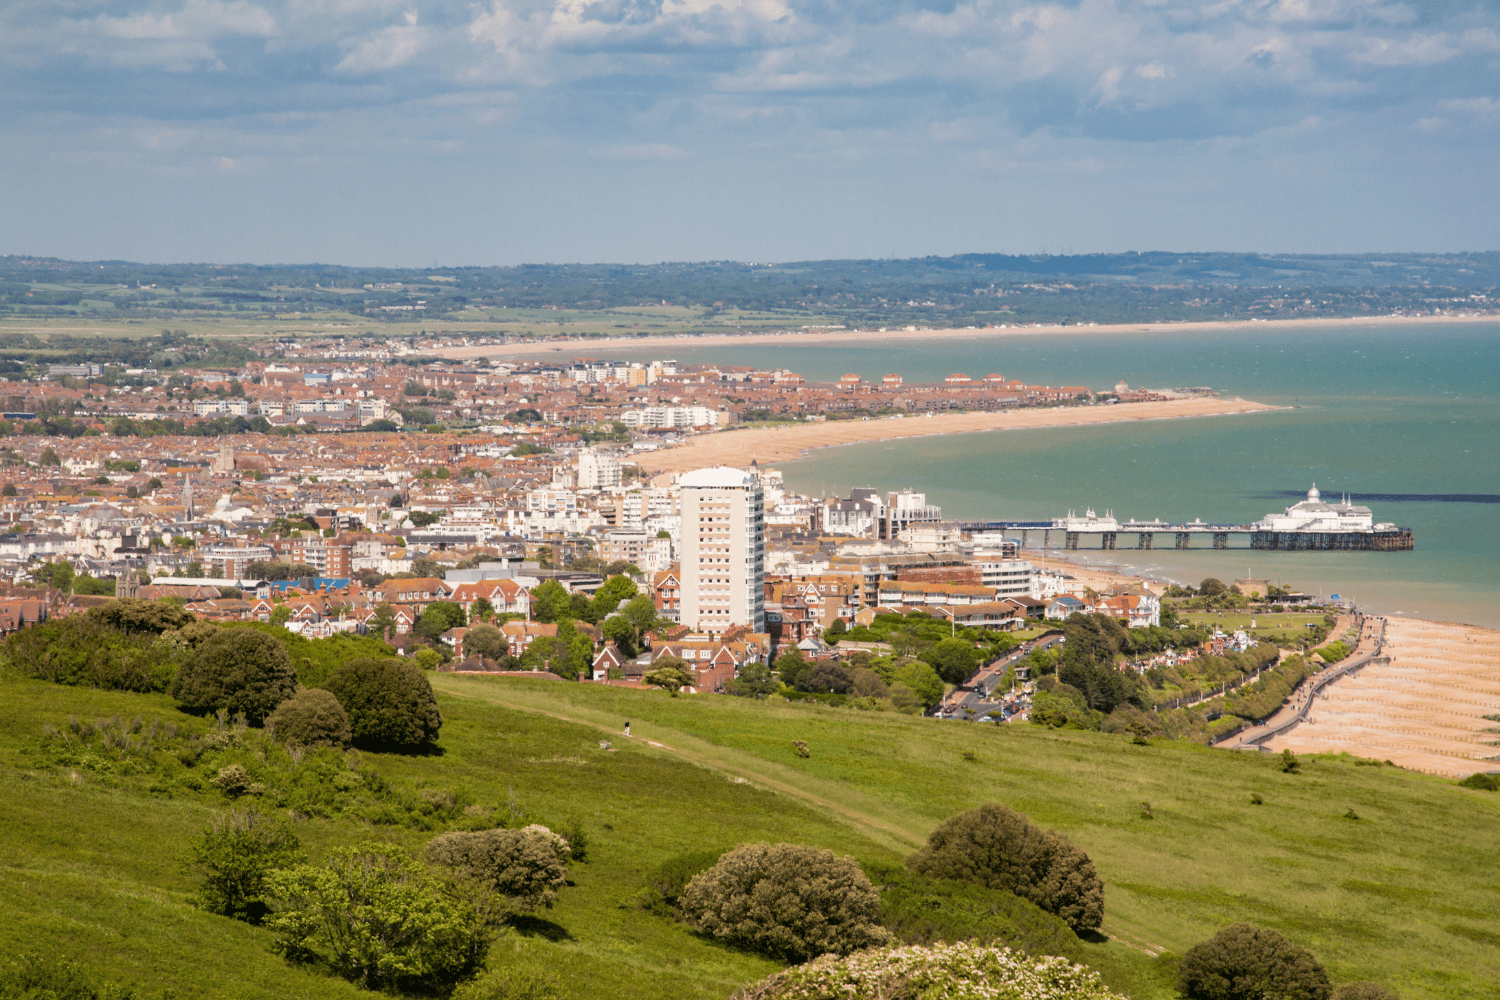 View across Brighton with the east pier in view